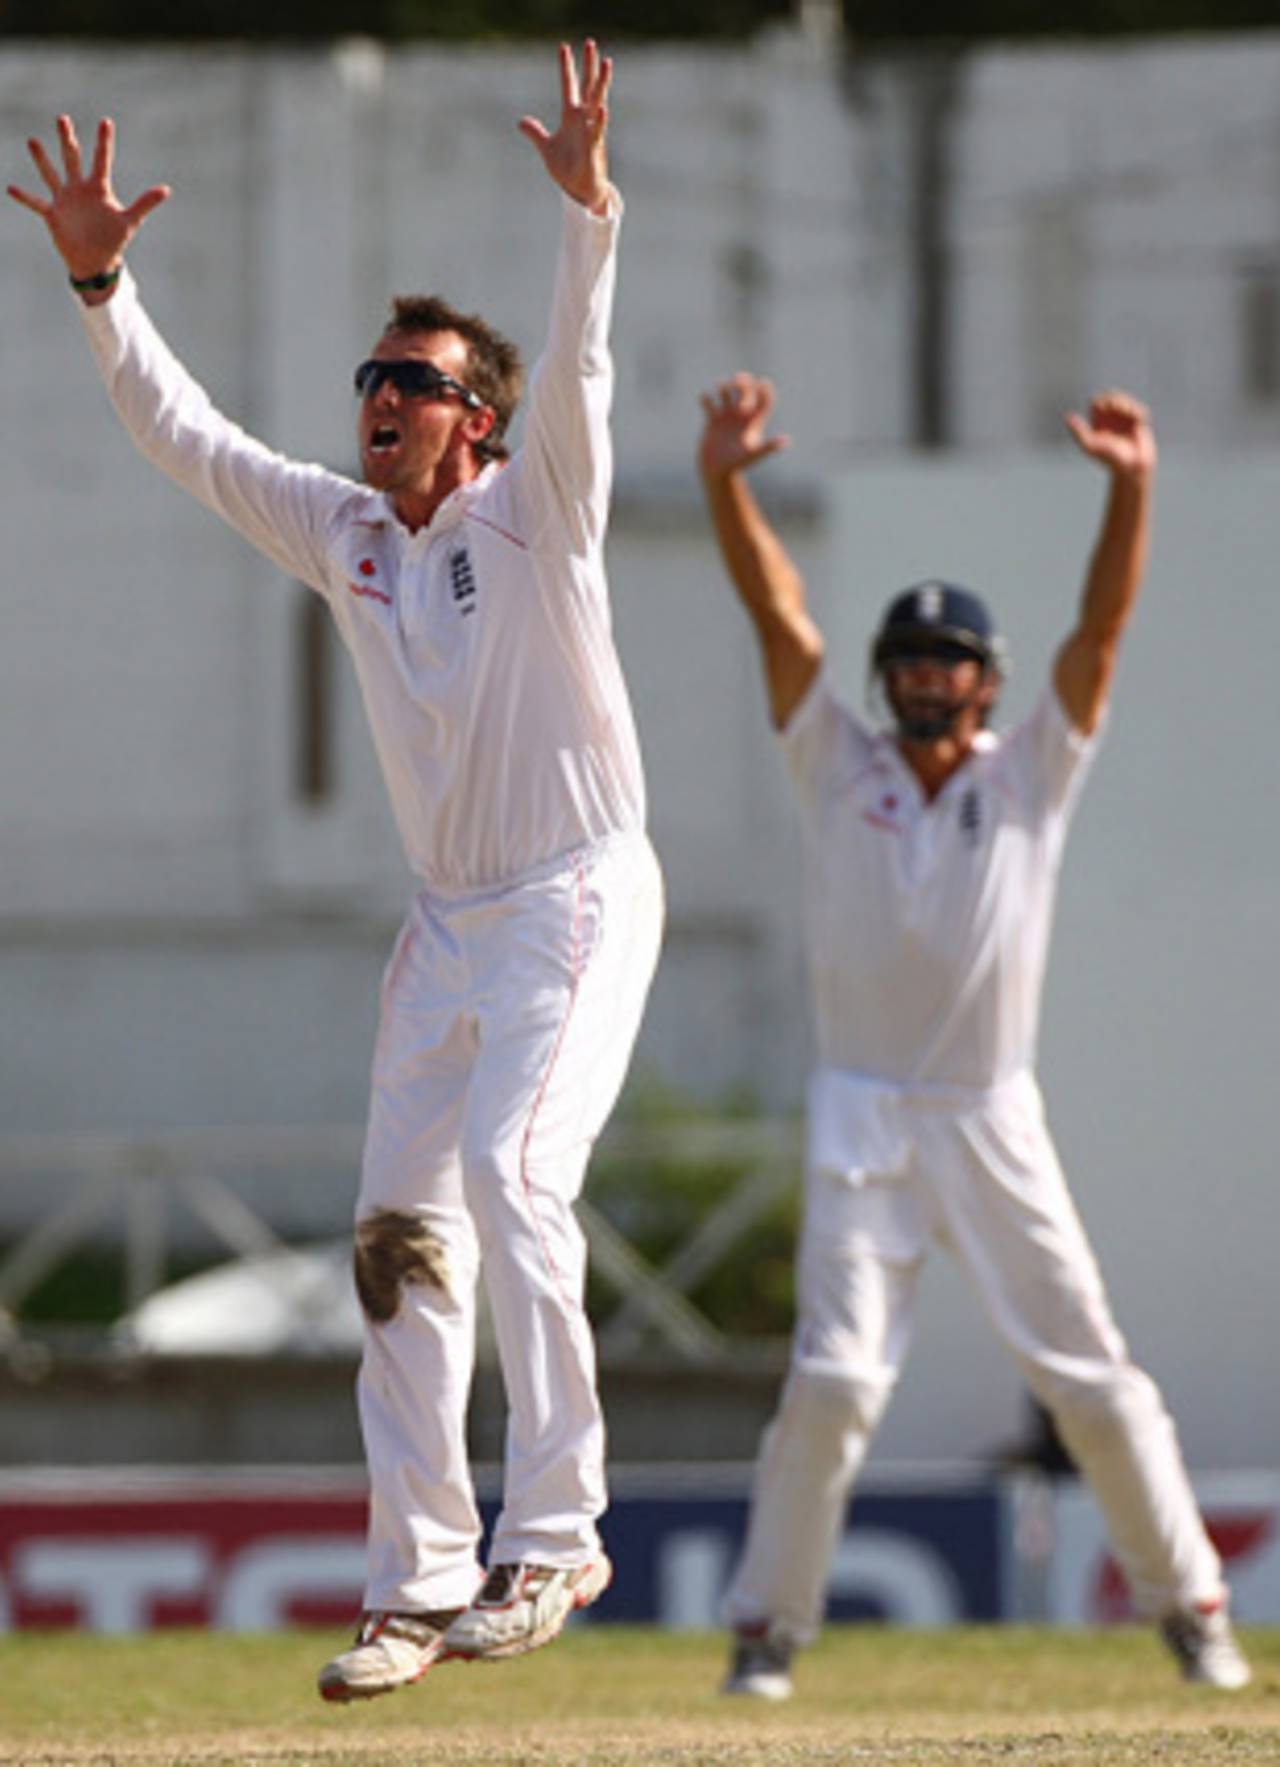 Graeme Swann: England's No. 1 spinner, but yet to play a Test at home&nbsp;&nbsp;&bull;&nbsp;&nbsp;Getty Images